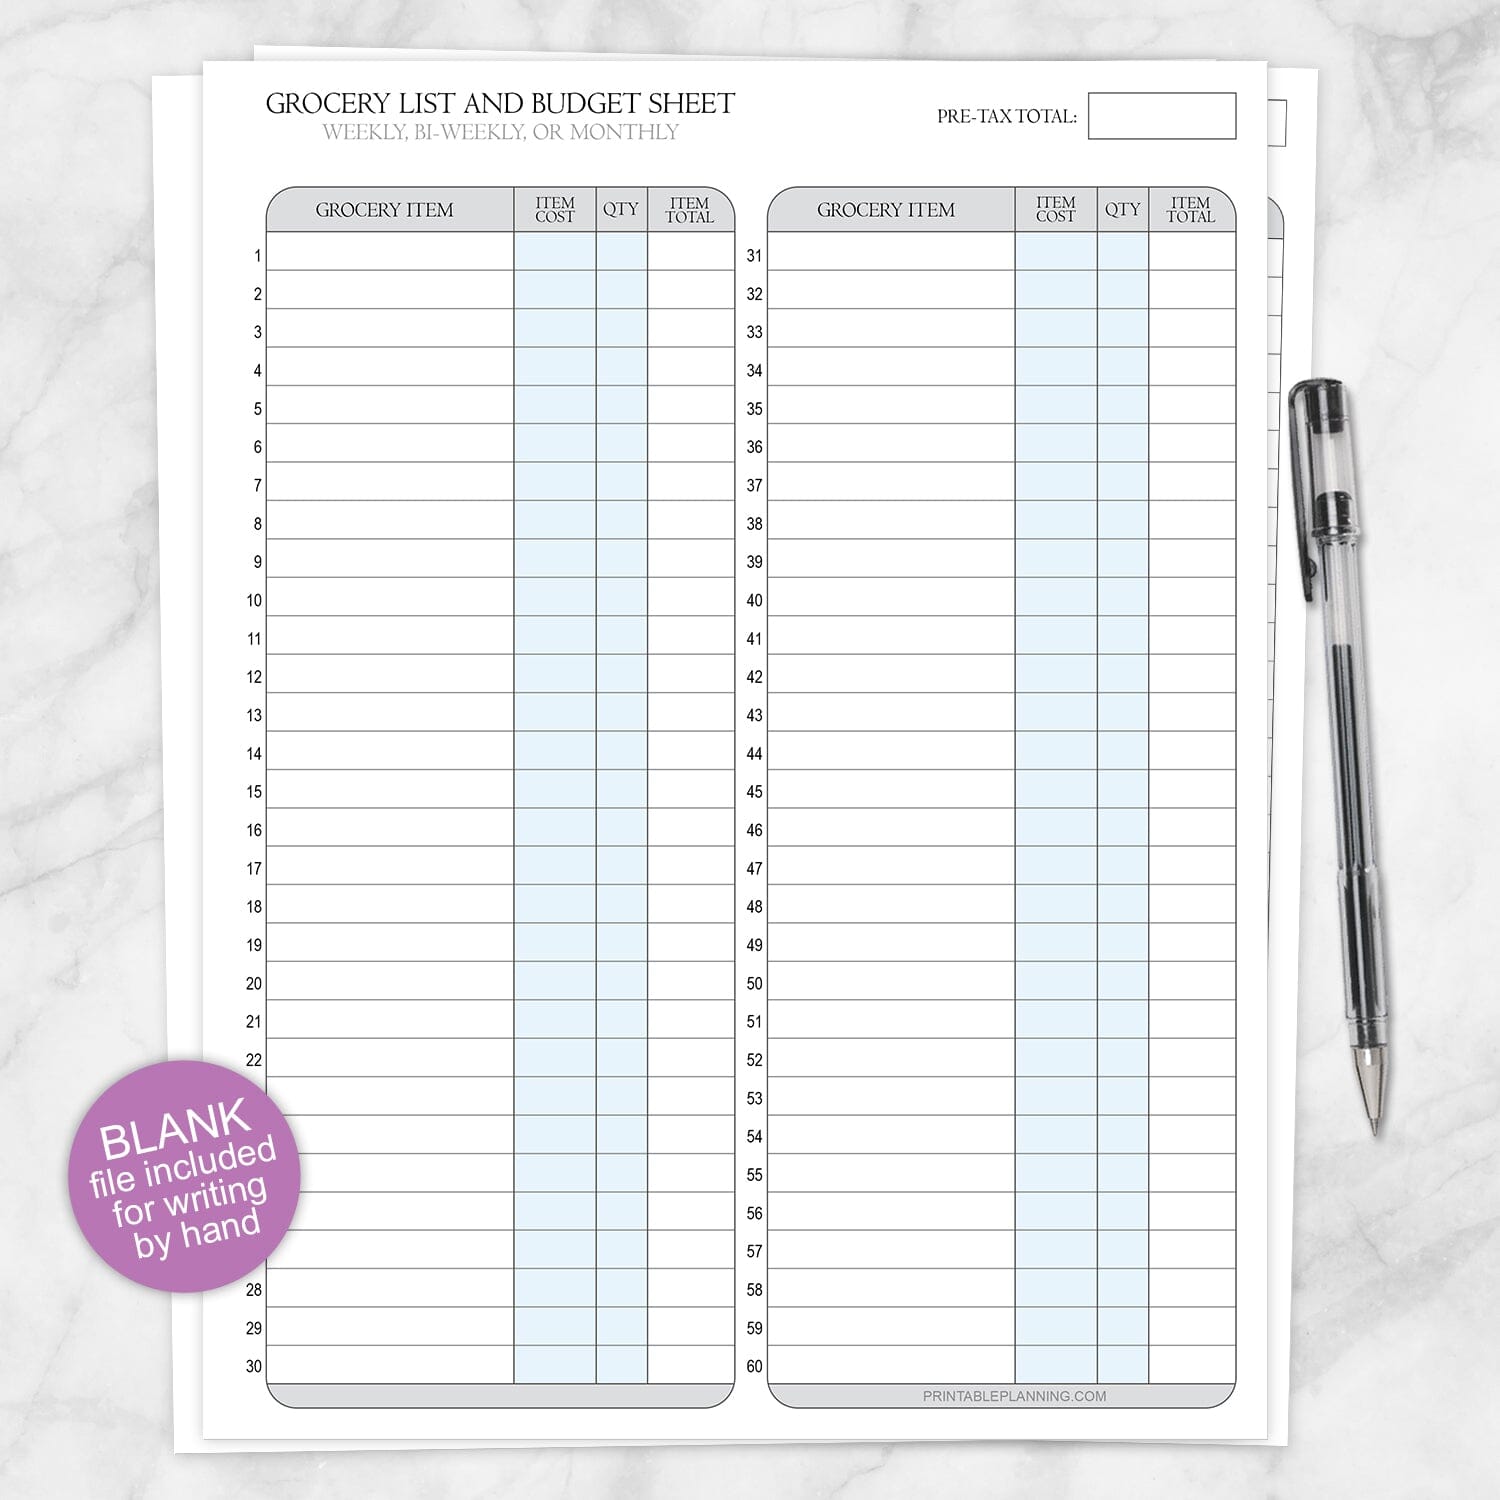 Printable Grocery Budget List and Worksheet at Printable Planning. A PDF printable grocery budget for keeping track of your food costs. Fill out by hand with pen or pencil.